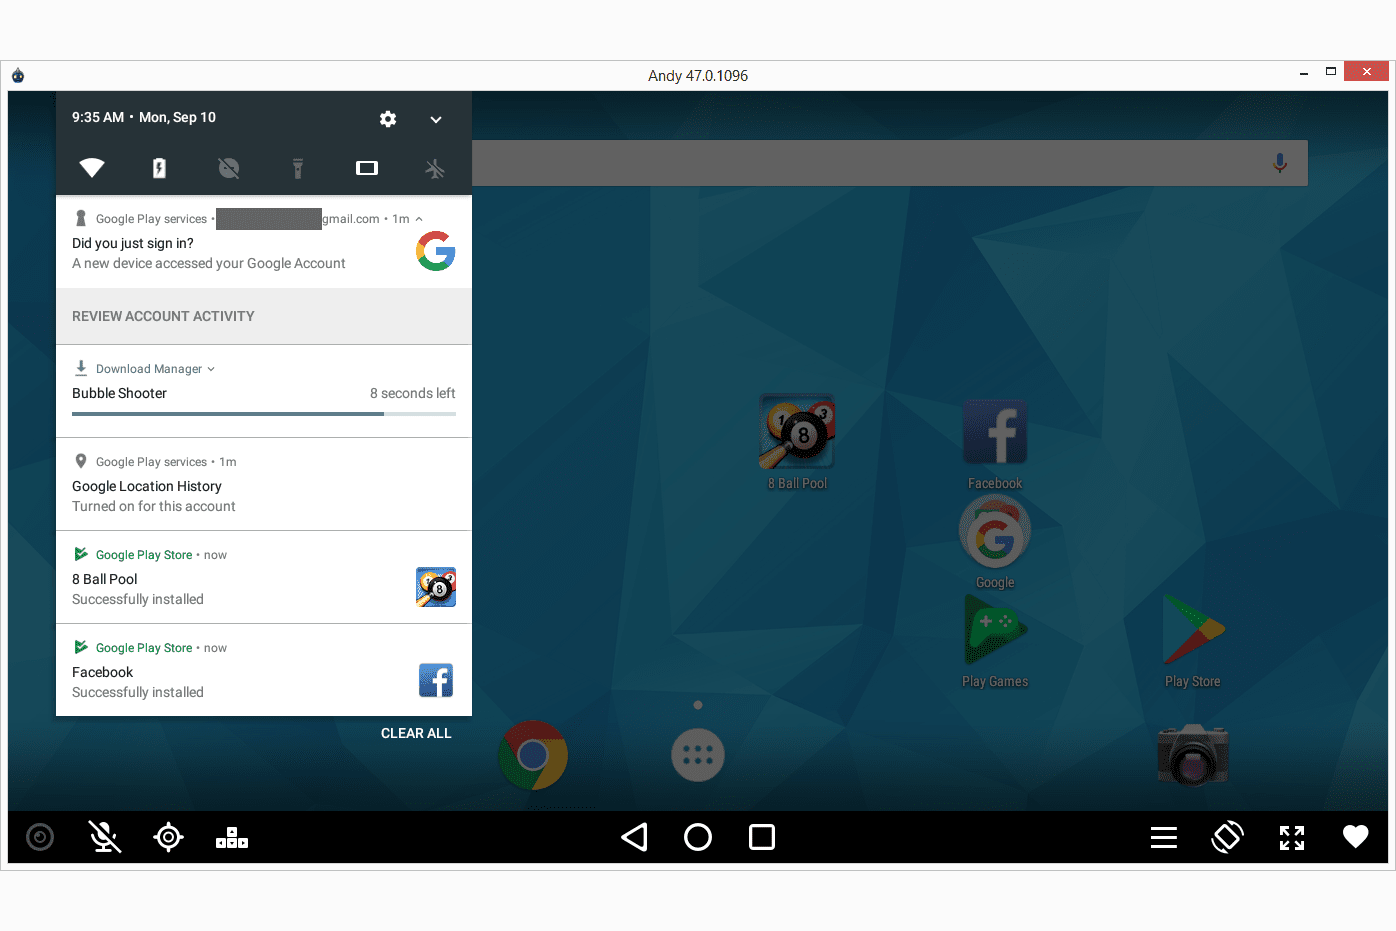 windroy android emulator download